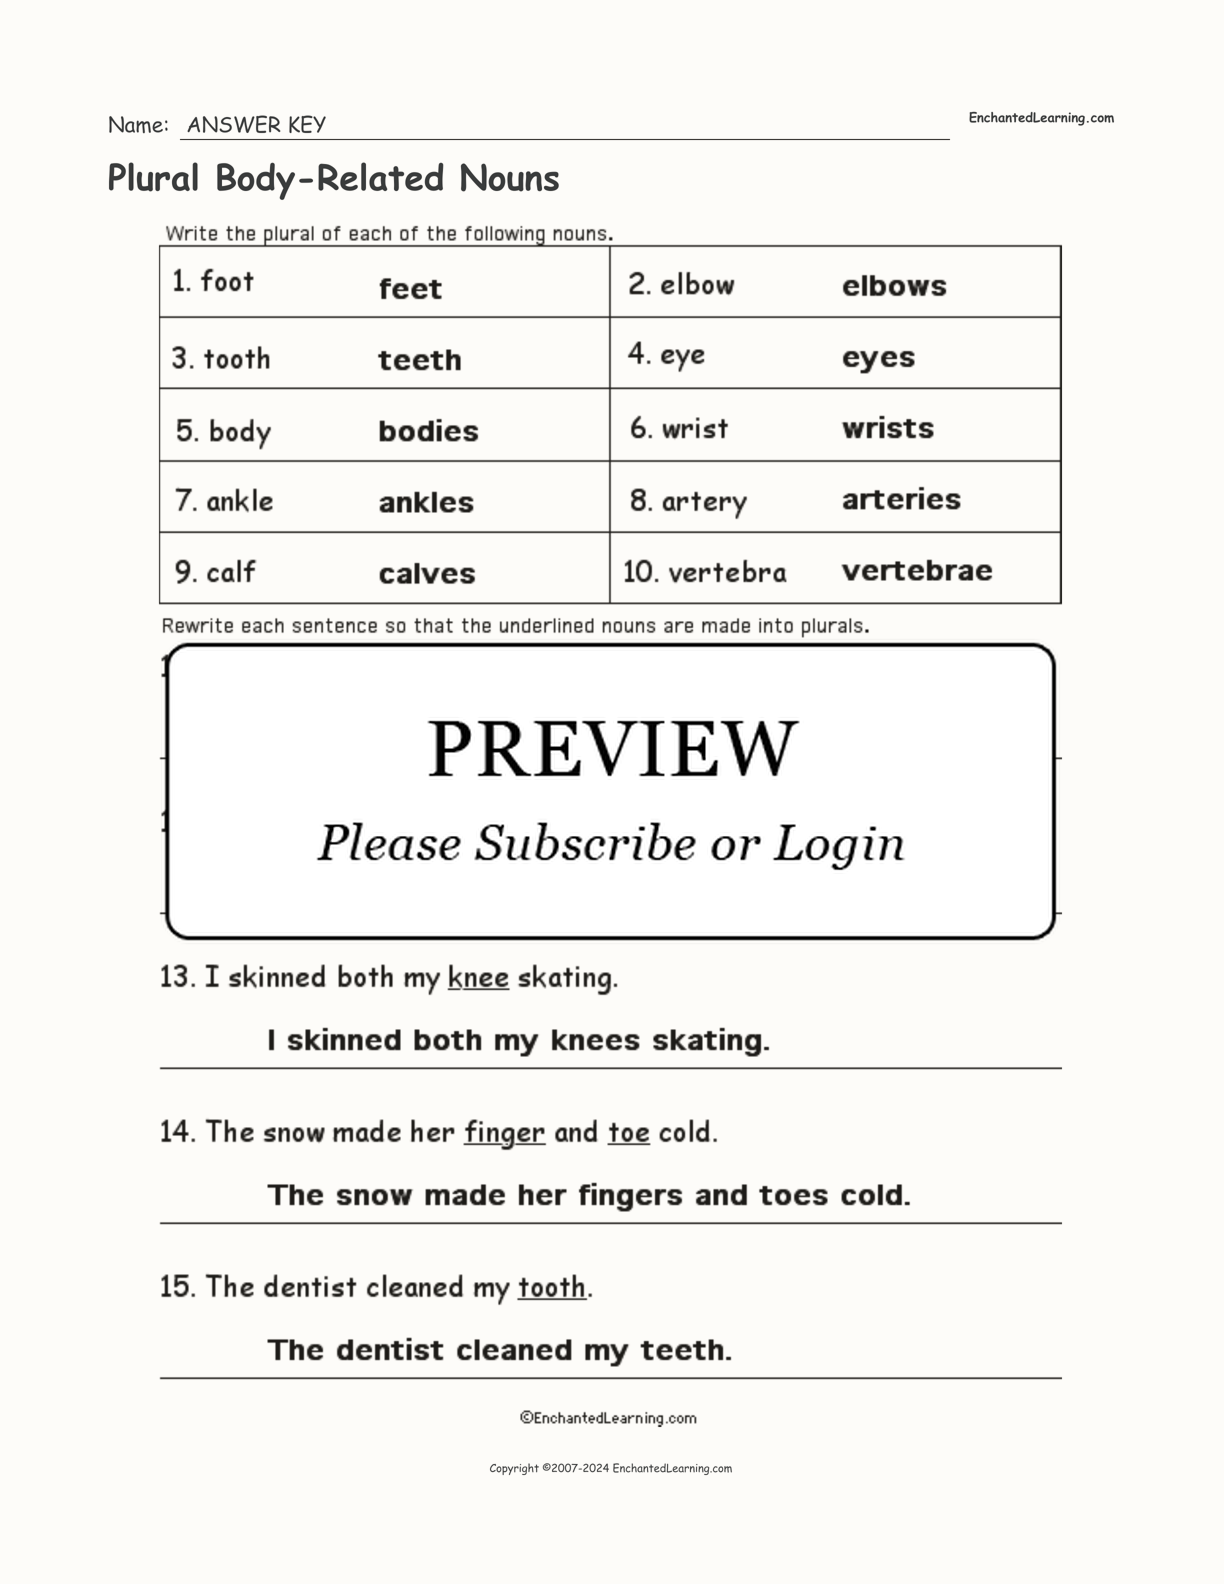 Plural Body-Related Nouns interactive worksheet page 2